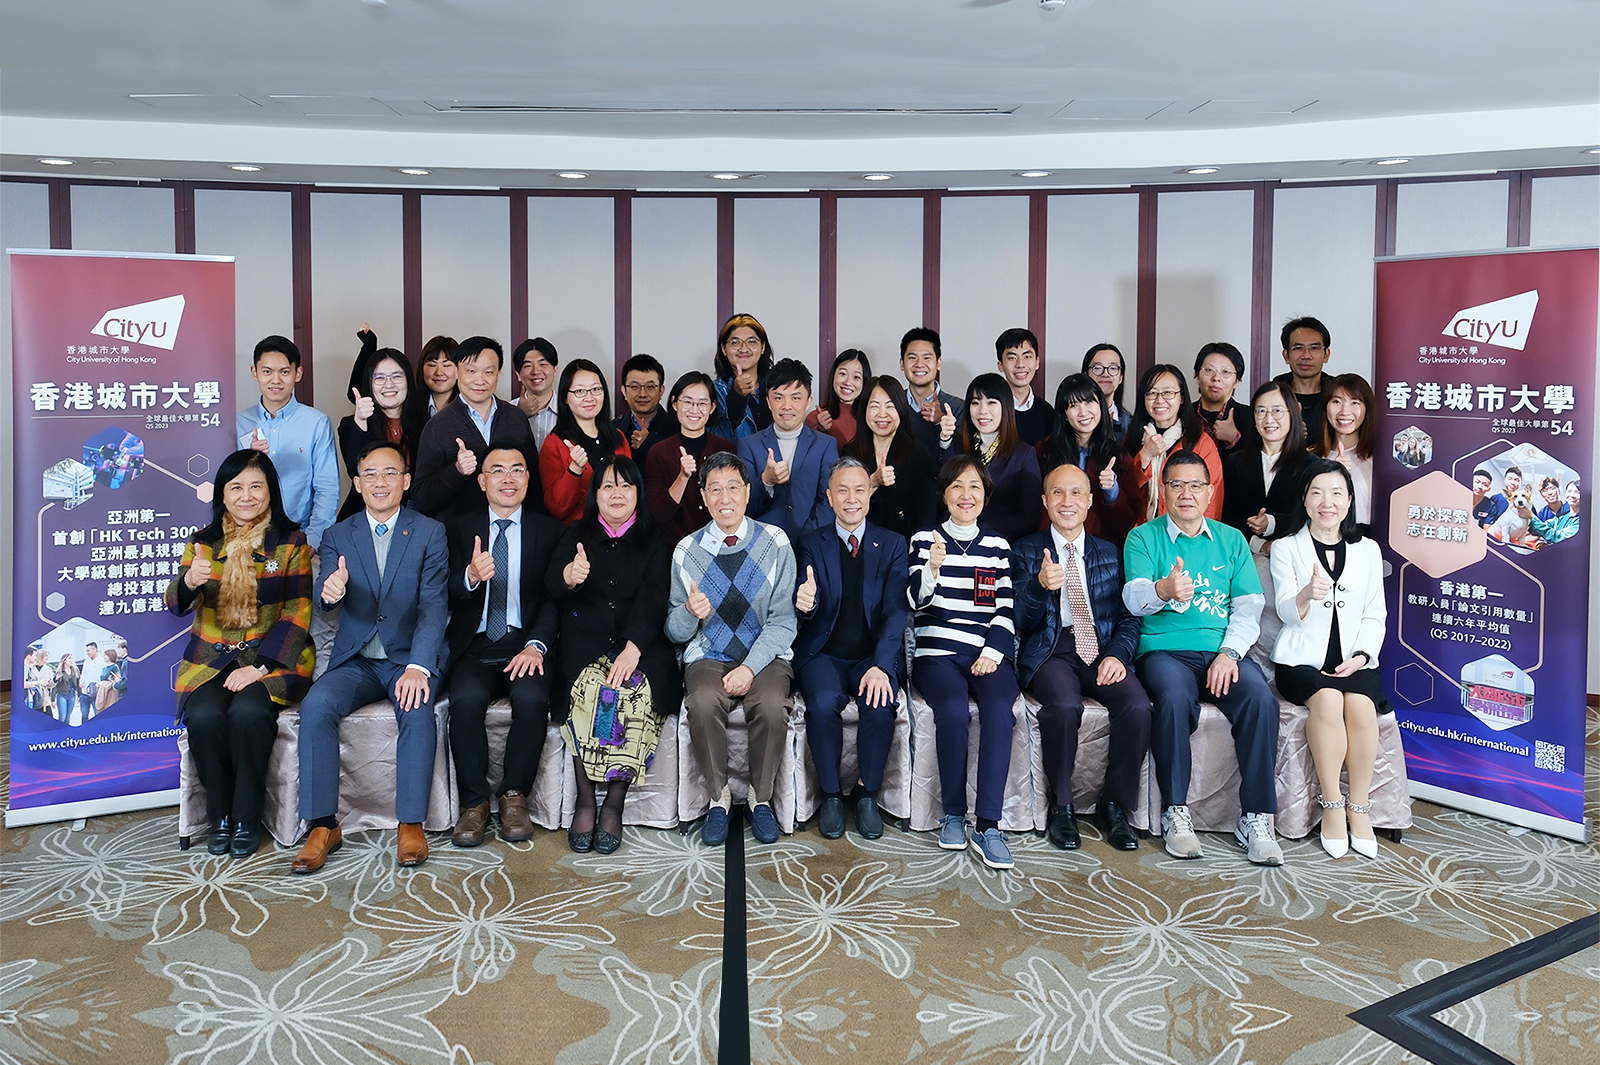 President Kuo, Professor Yuen (1st row, 5th & 6th from left) and Professor He (2nd row, 6th from left) met with secondary school principals at a dinner reception during their visit to Taiwan.